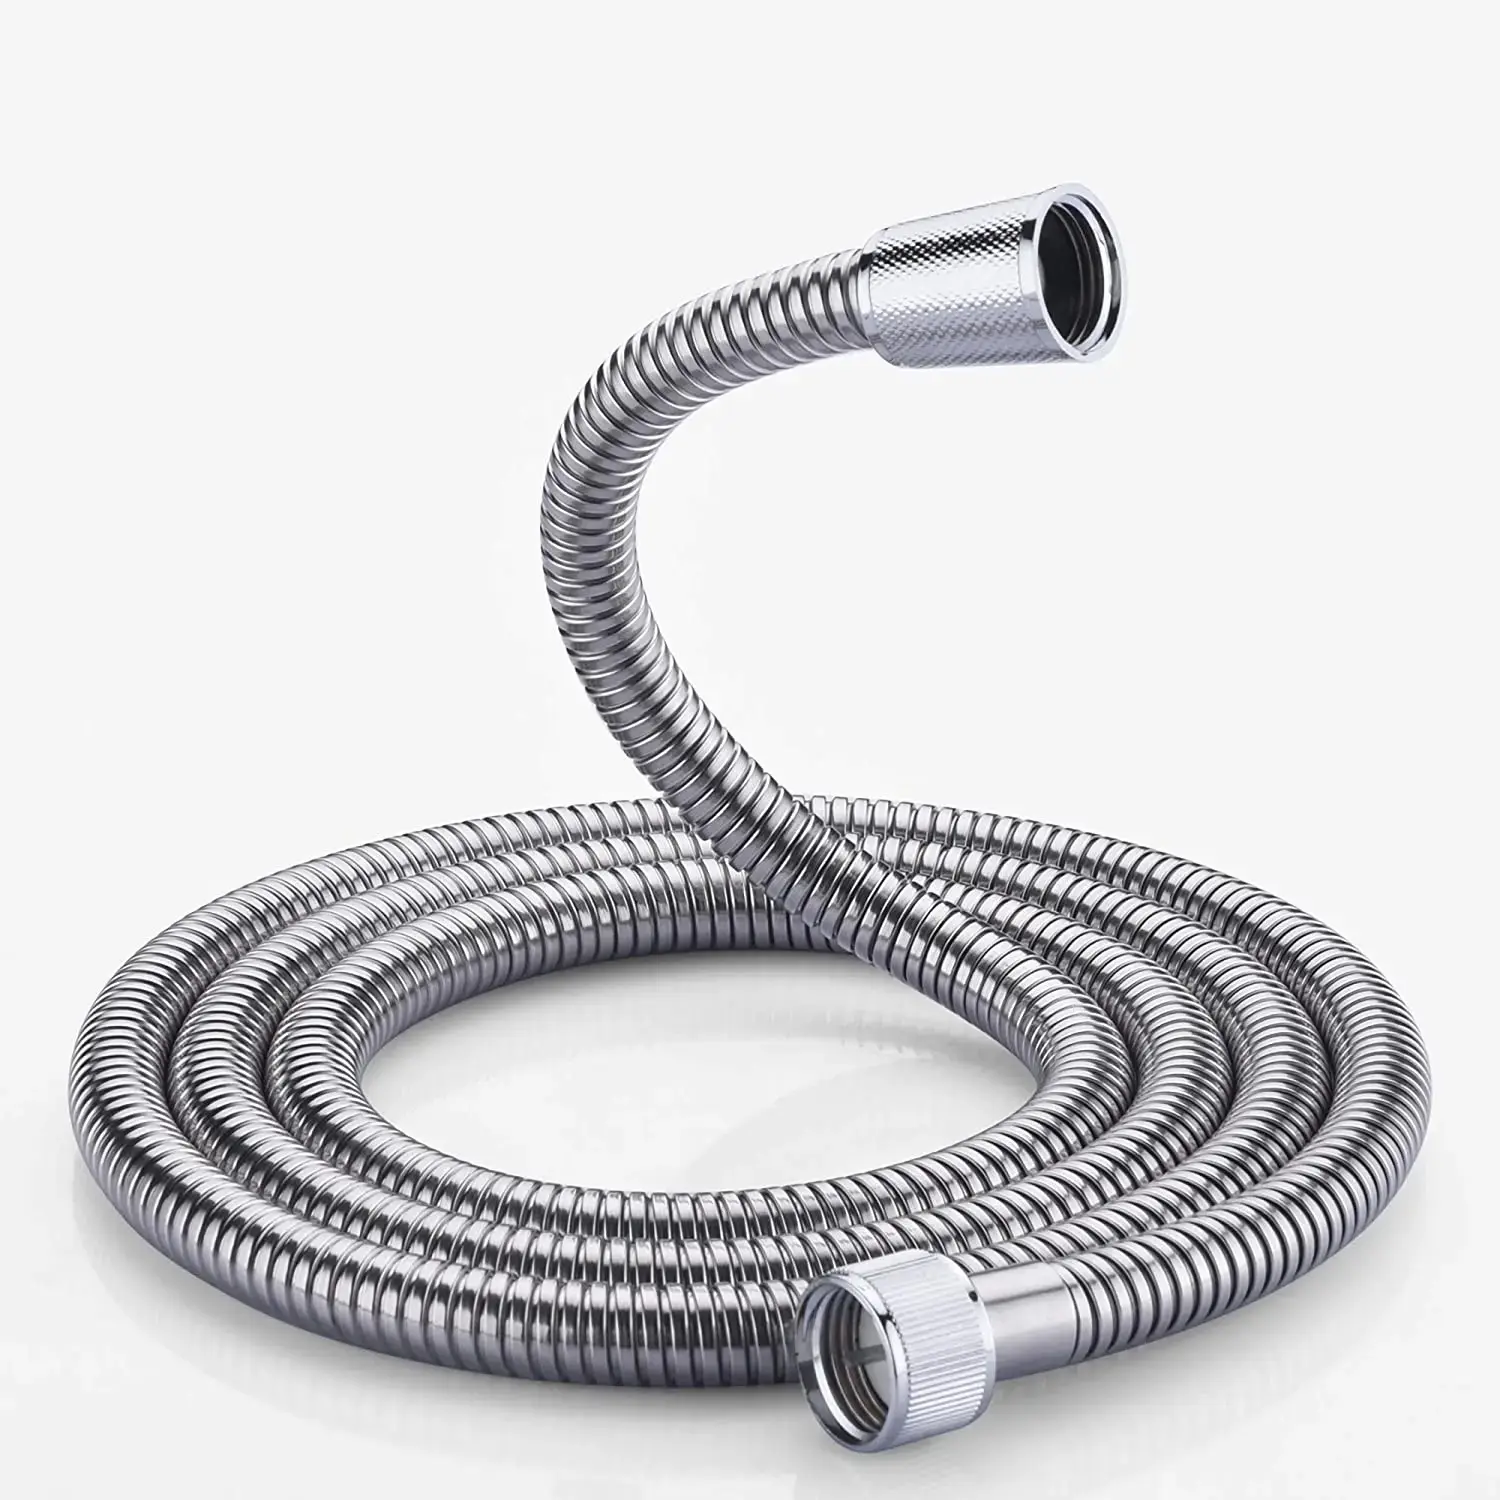 DLP F1/2"*F1/2" stainless steel 304 wire braided flexible metal hose for hot water